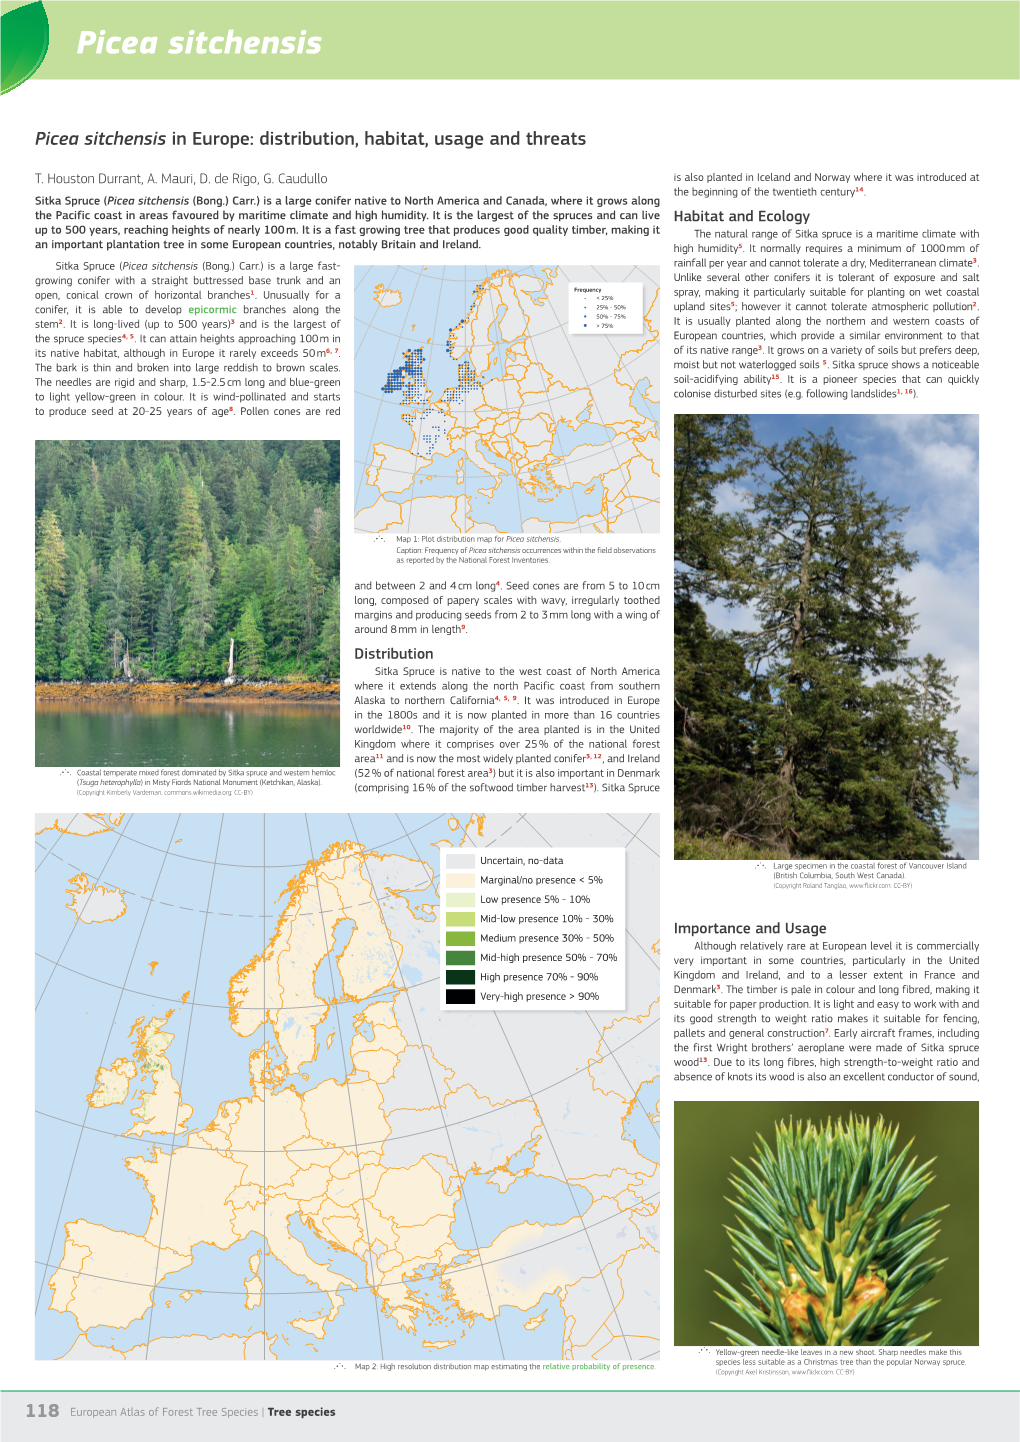 Picea Sitchensis in Europe: Distribution, Habitat, Usage and Threats